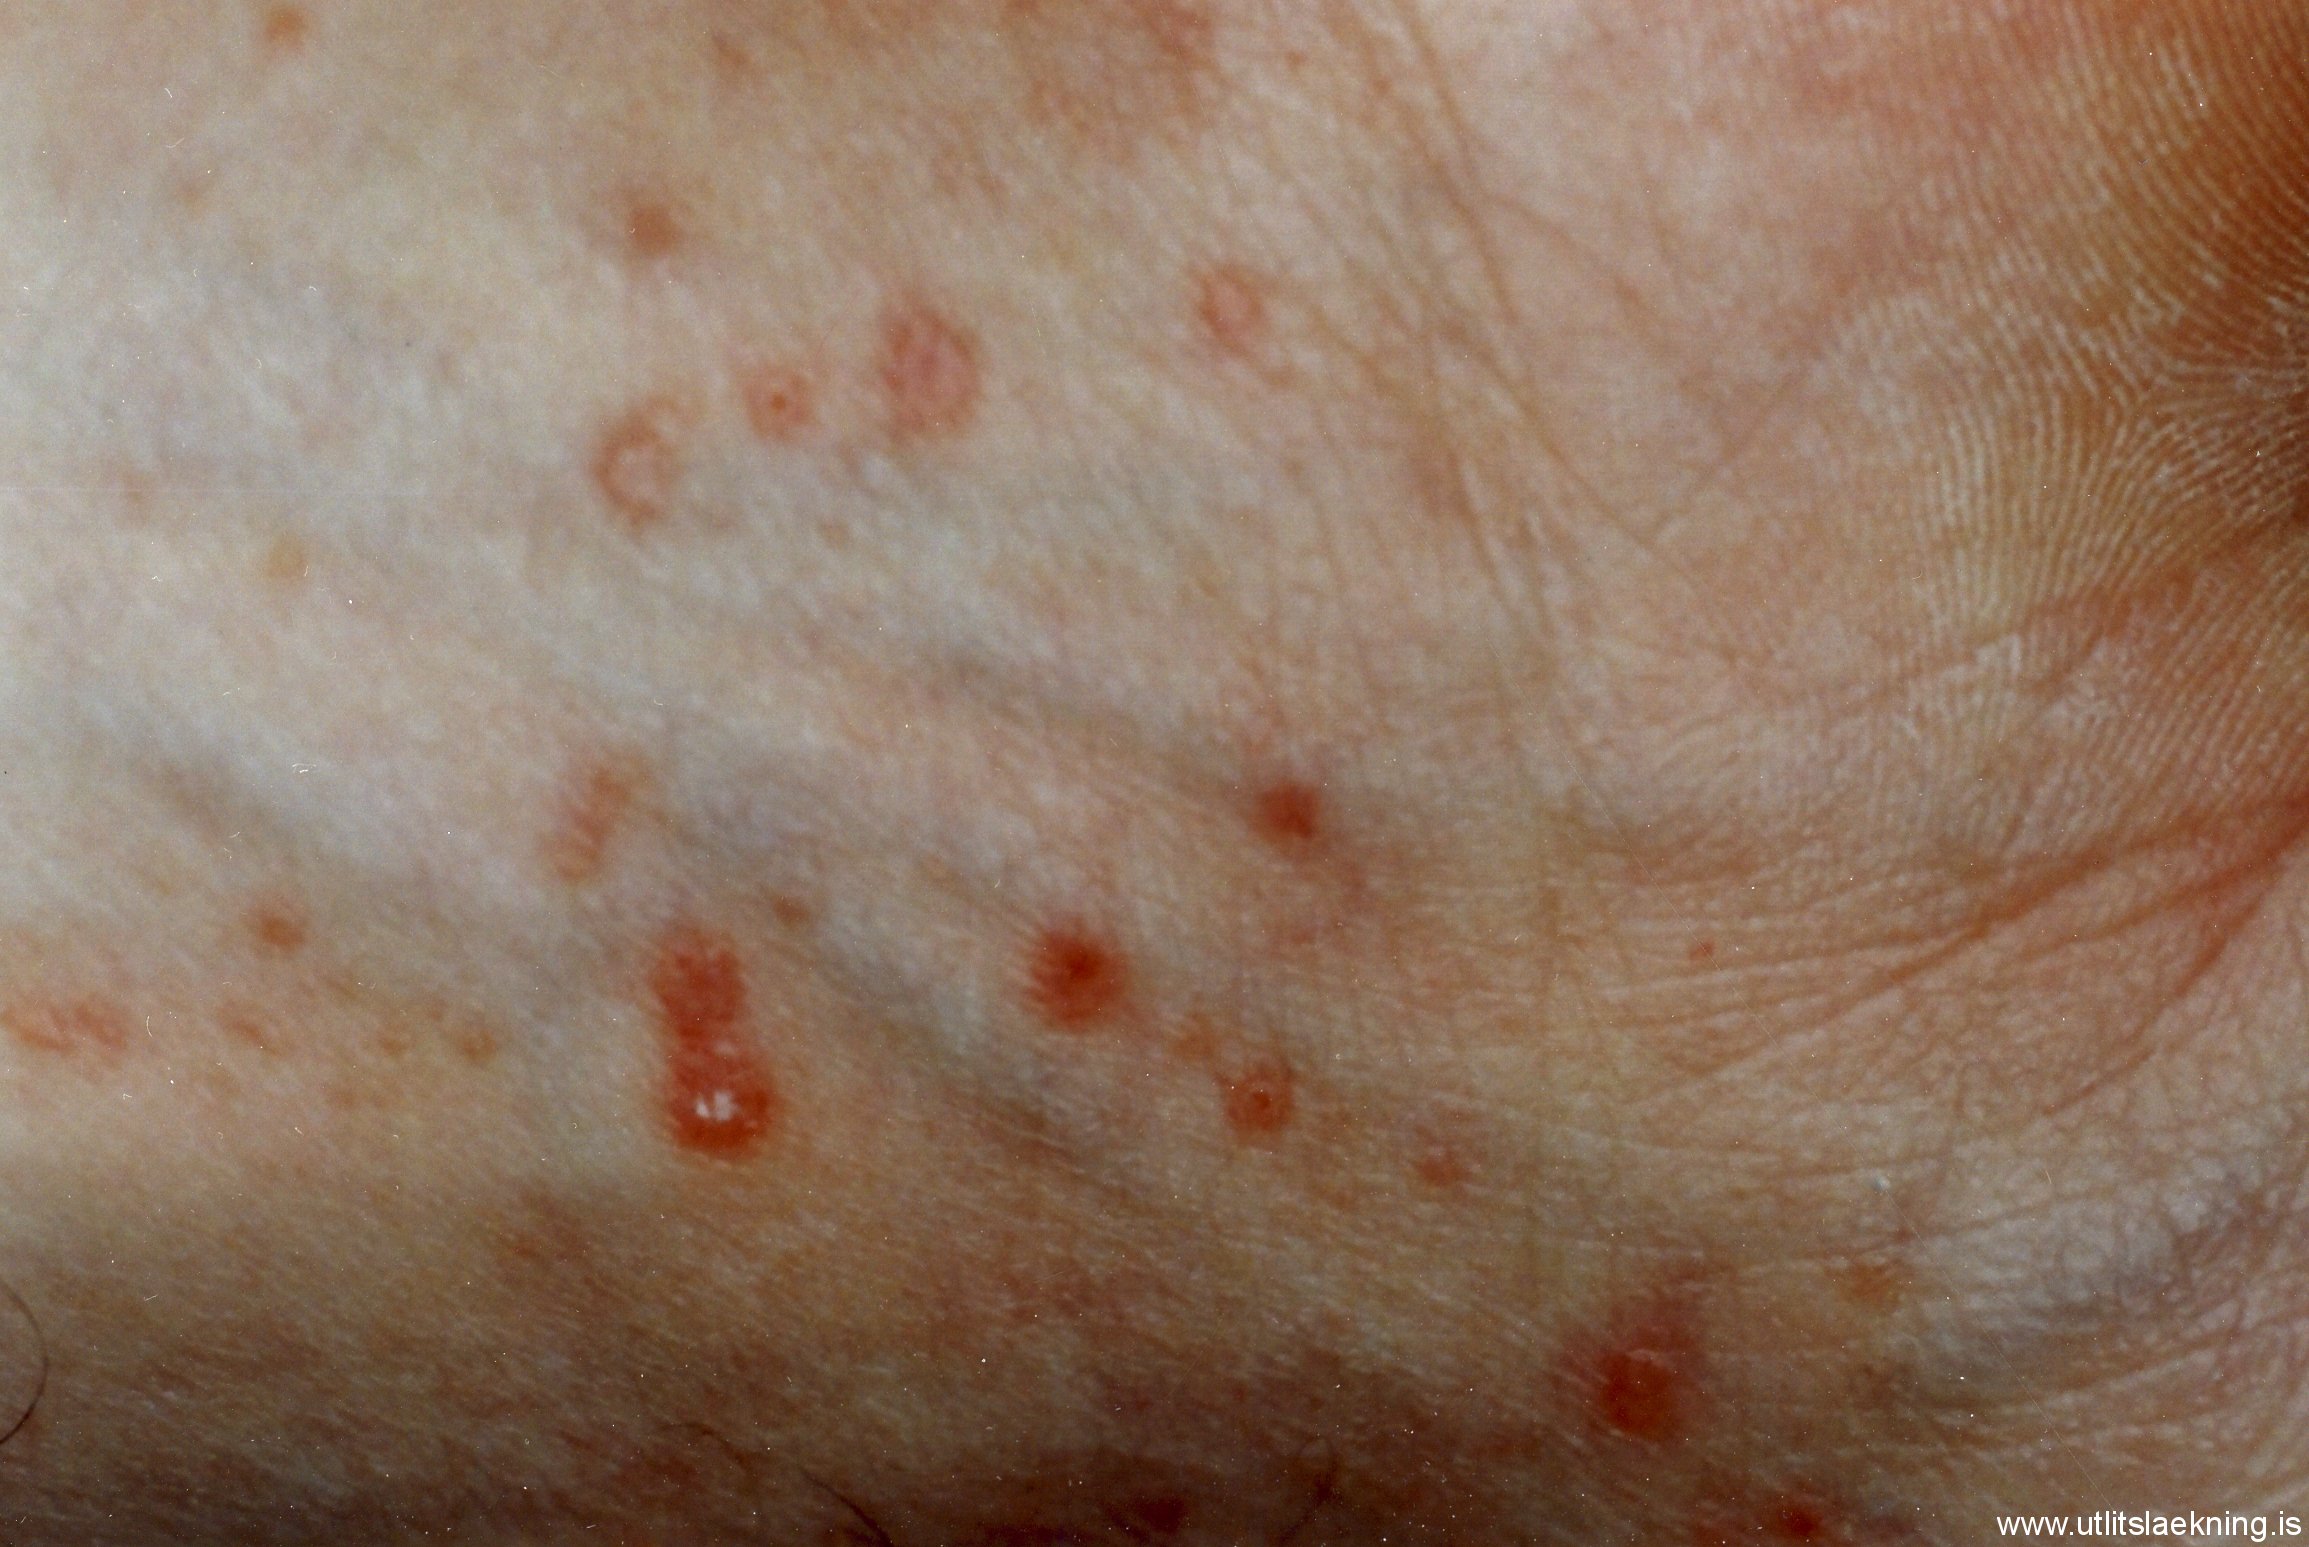 swimmers itch bumps